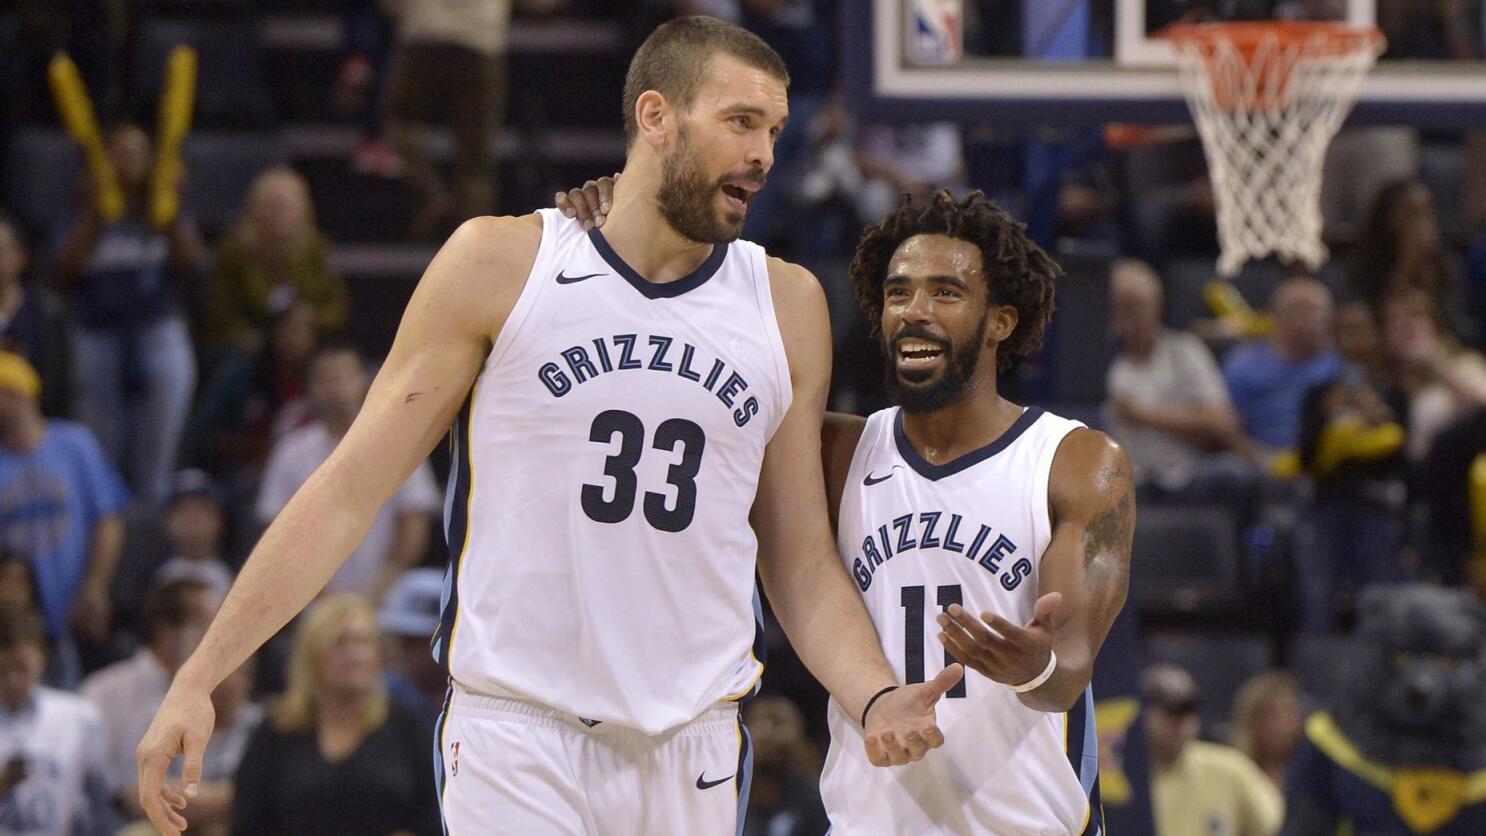 Will the Grizzlies' Feel-Good Season End on a Painful Note? - The